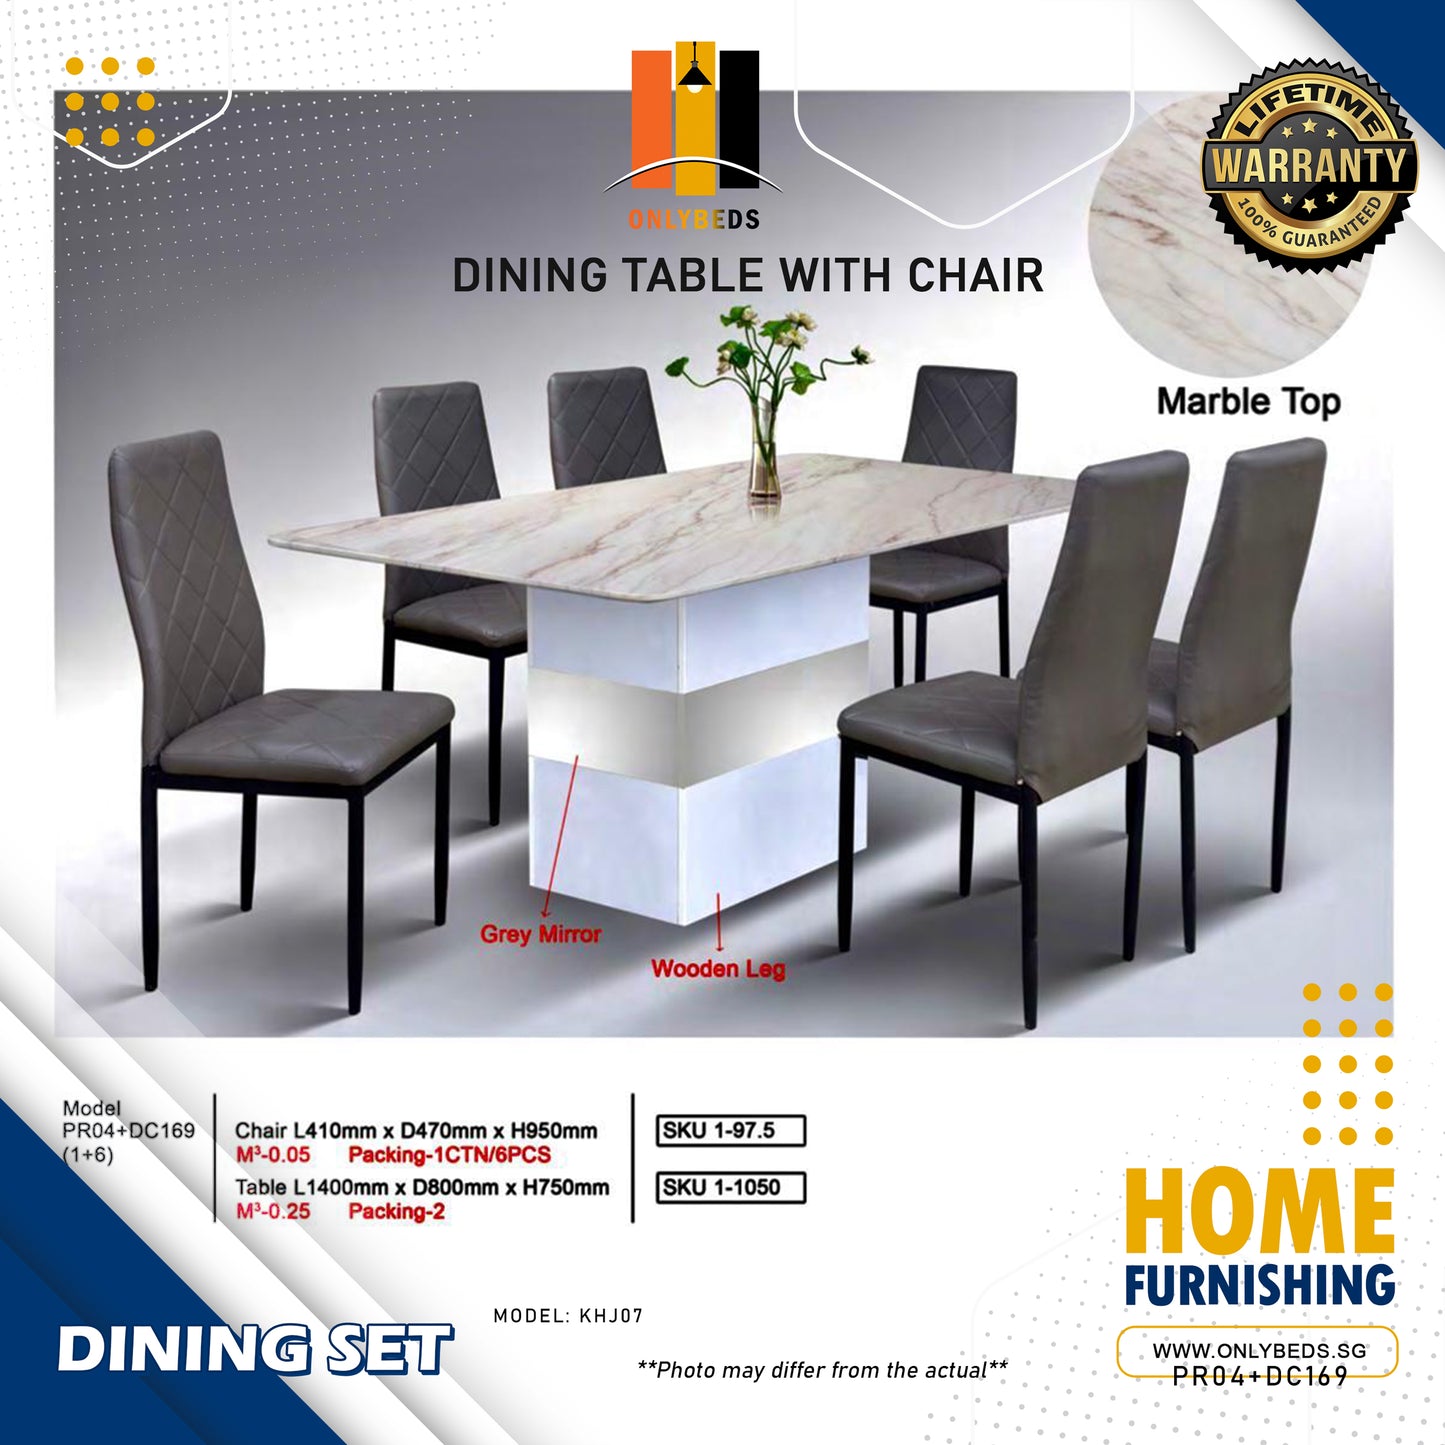 Dining Table with Chair (Dining Set) l PR04+DC169 (WHITE)